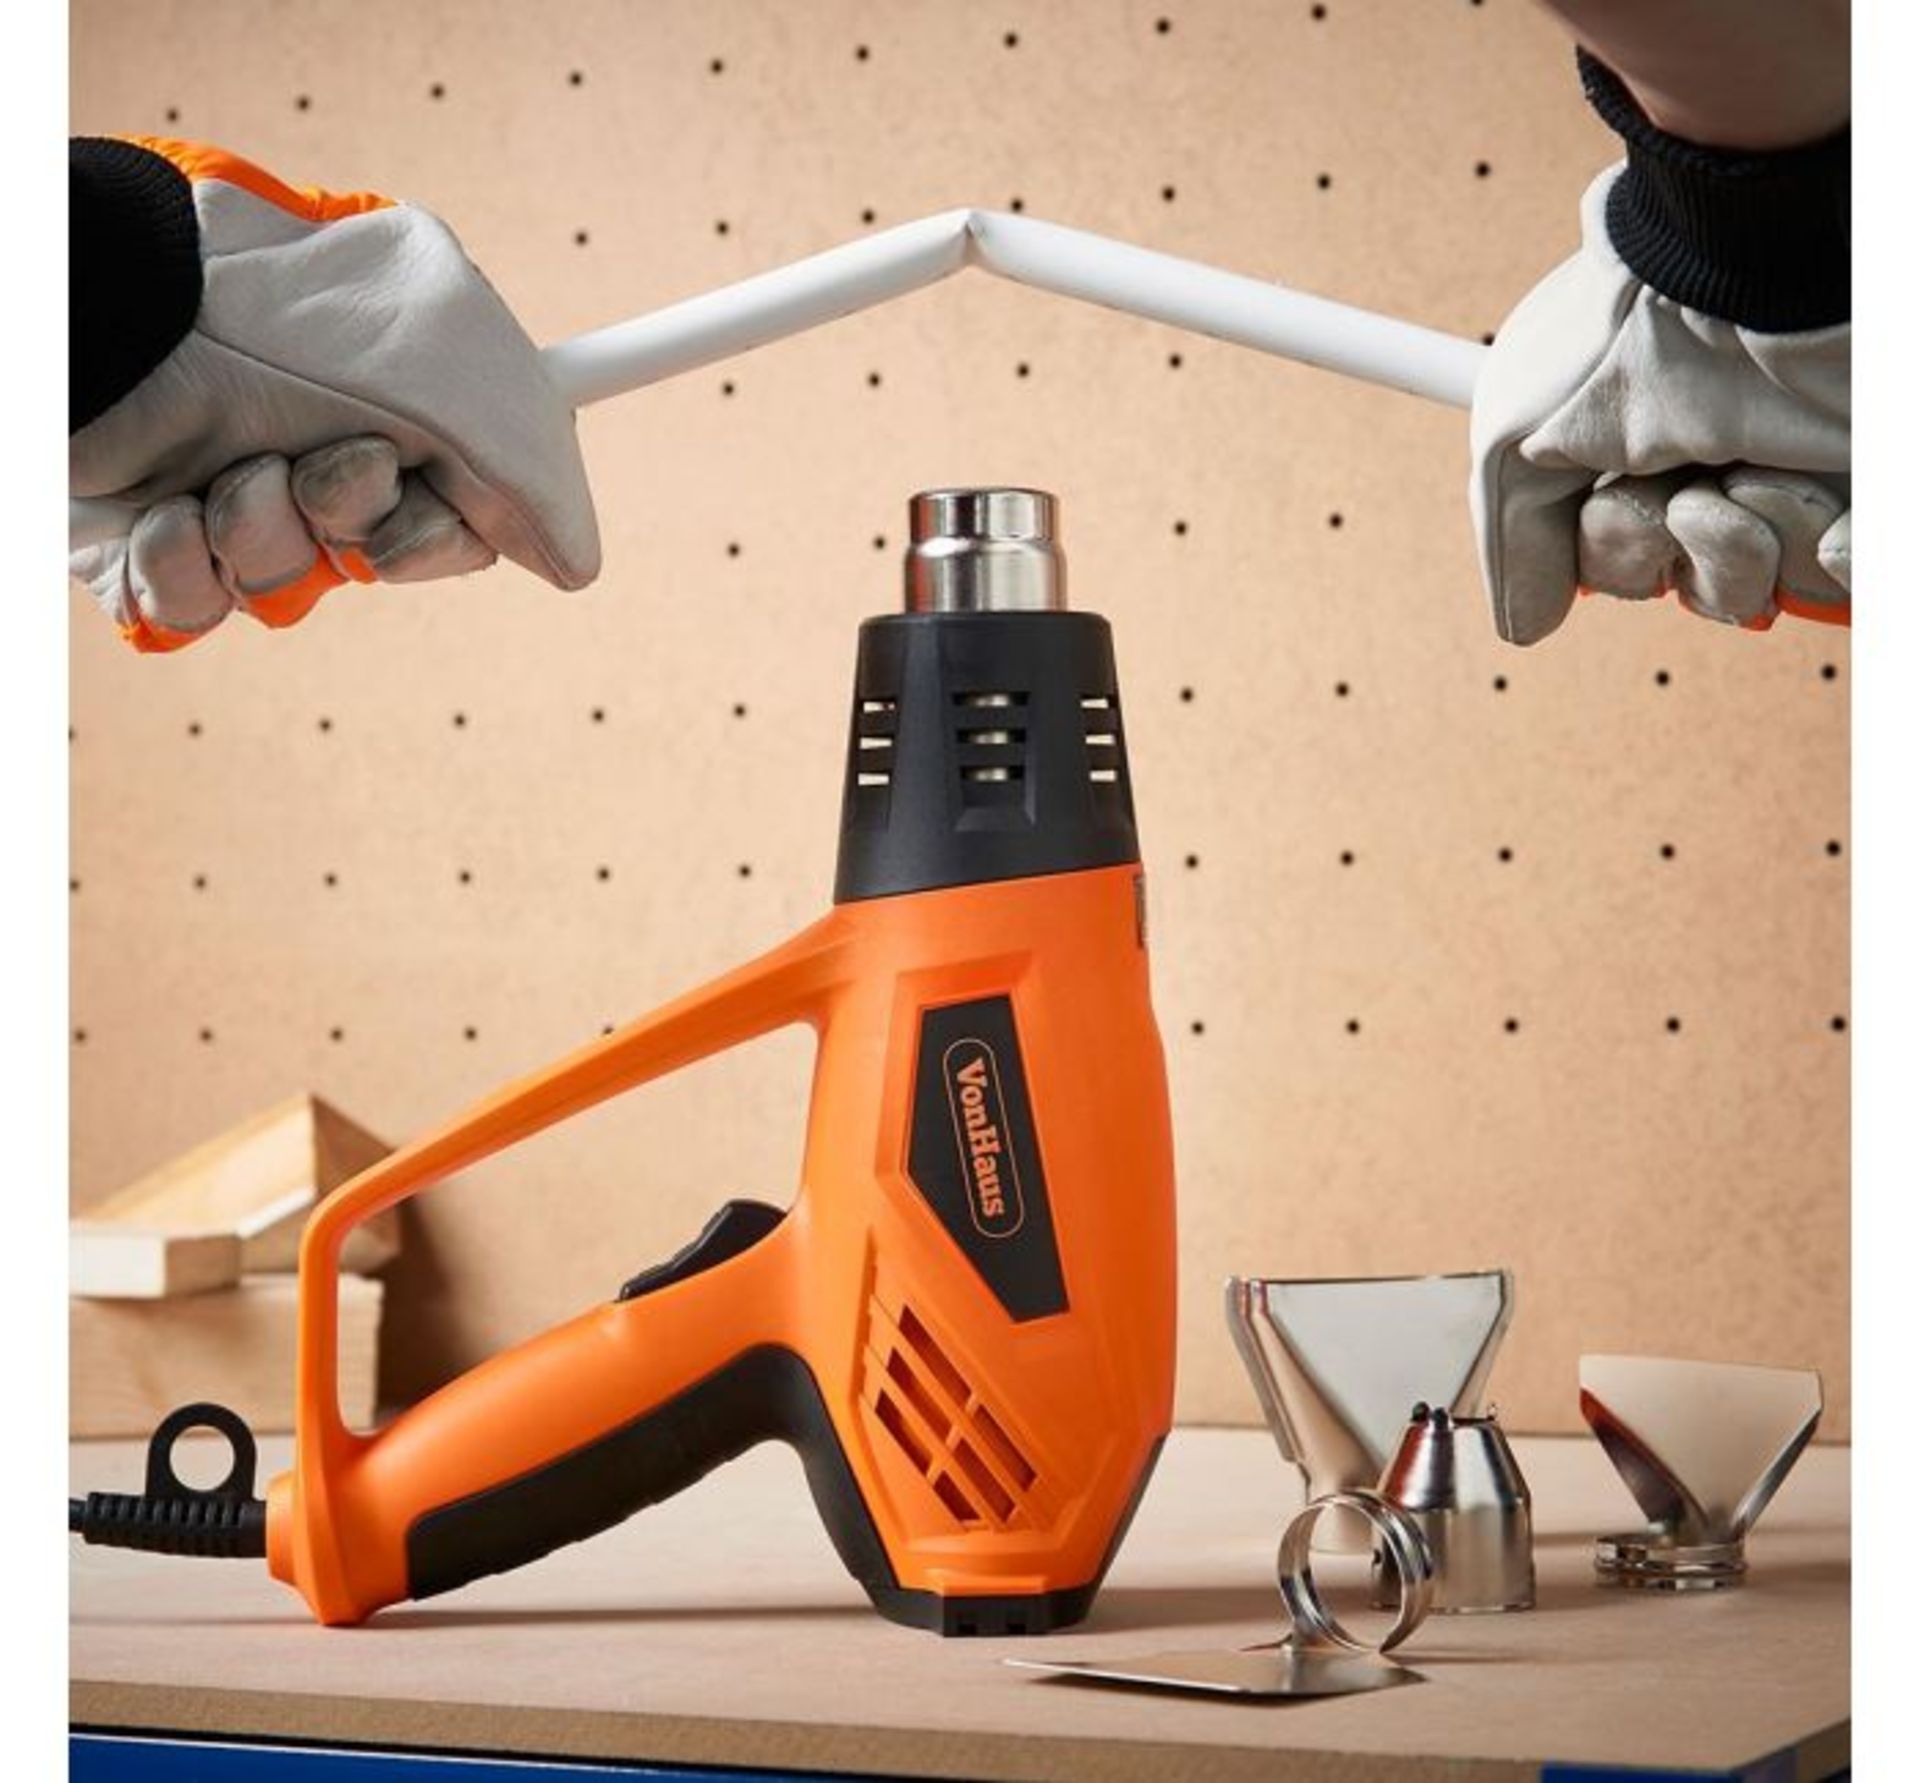 (F11) 2000W Heat Gun Ideal for DIY projects, bending copper pipes, loosening rusted bolts, lig...